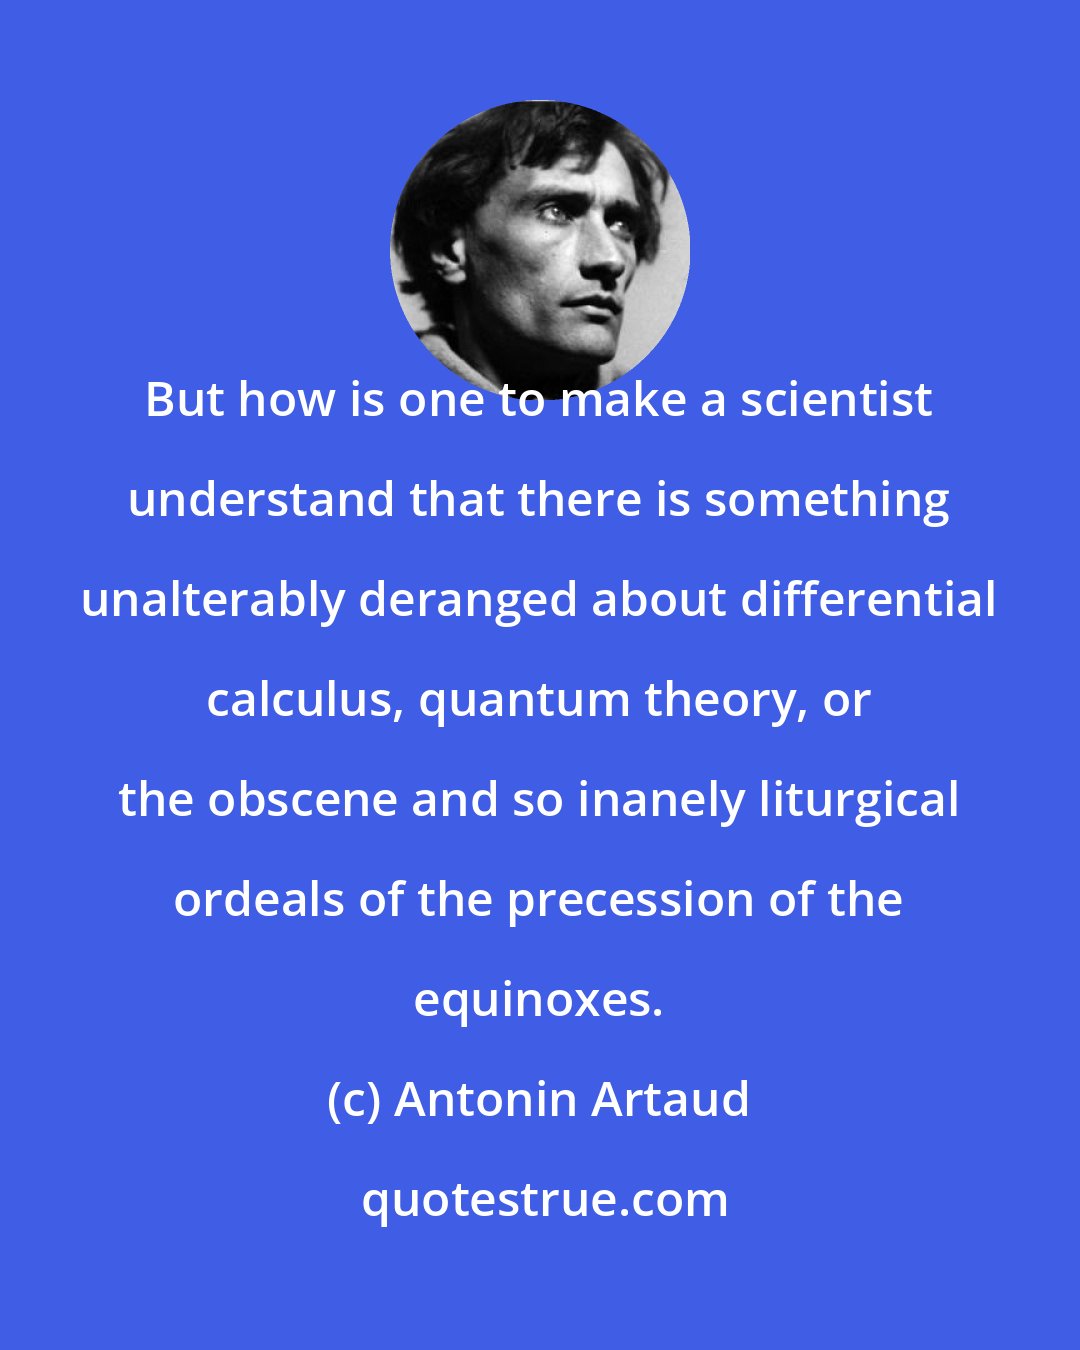 Antonin Artaud: But how is one to make a scientist understand that there is something unalterably deranged about differential calculus, quantum theory, or the obscene and so inanely liturgical ordeals of the precession of the equinoxes.